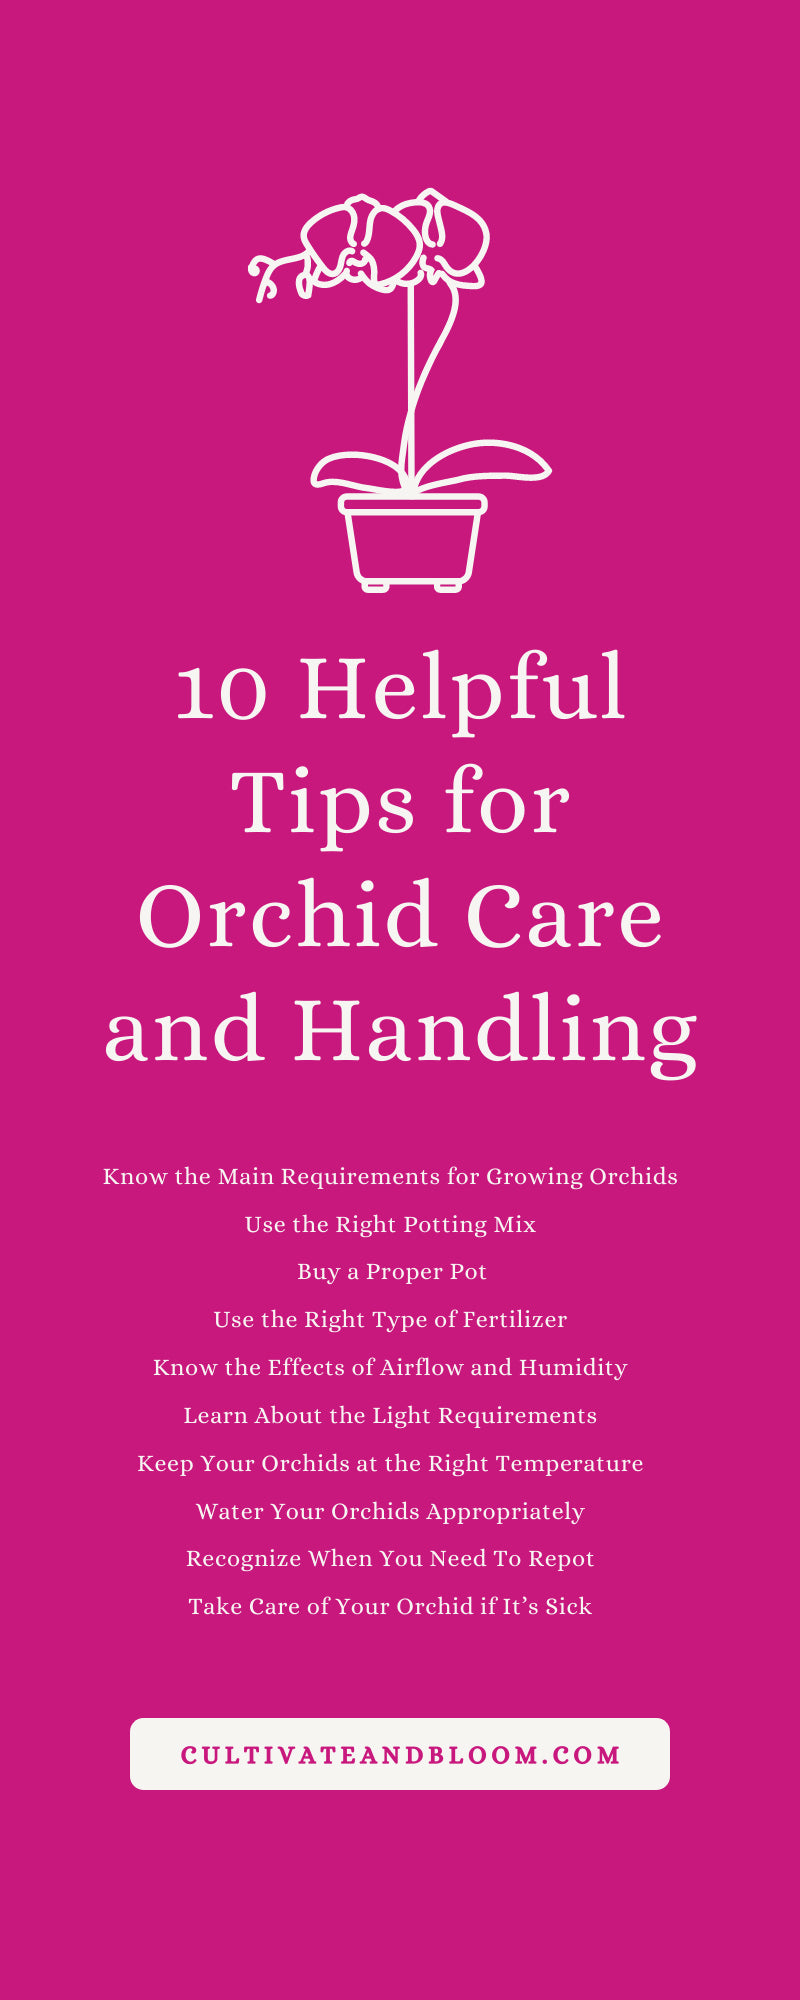 10 Helpful Tips for Orchid Care and Handling